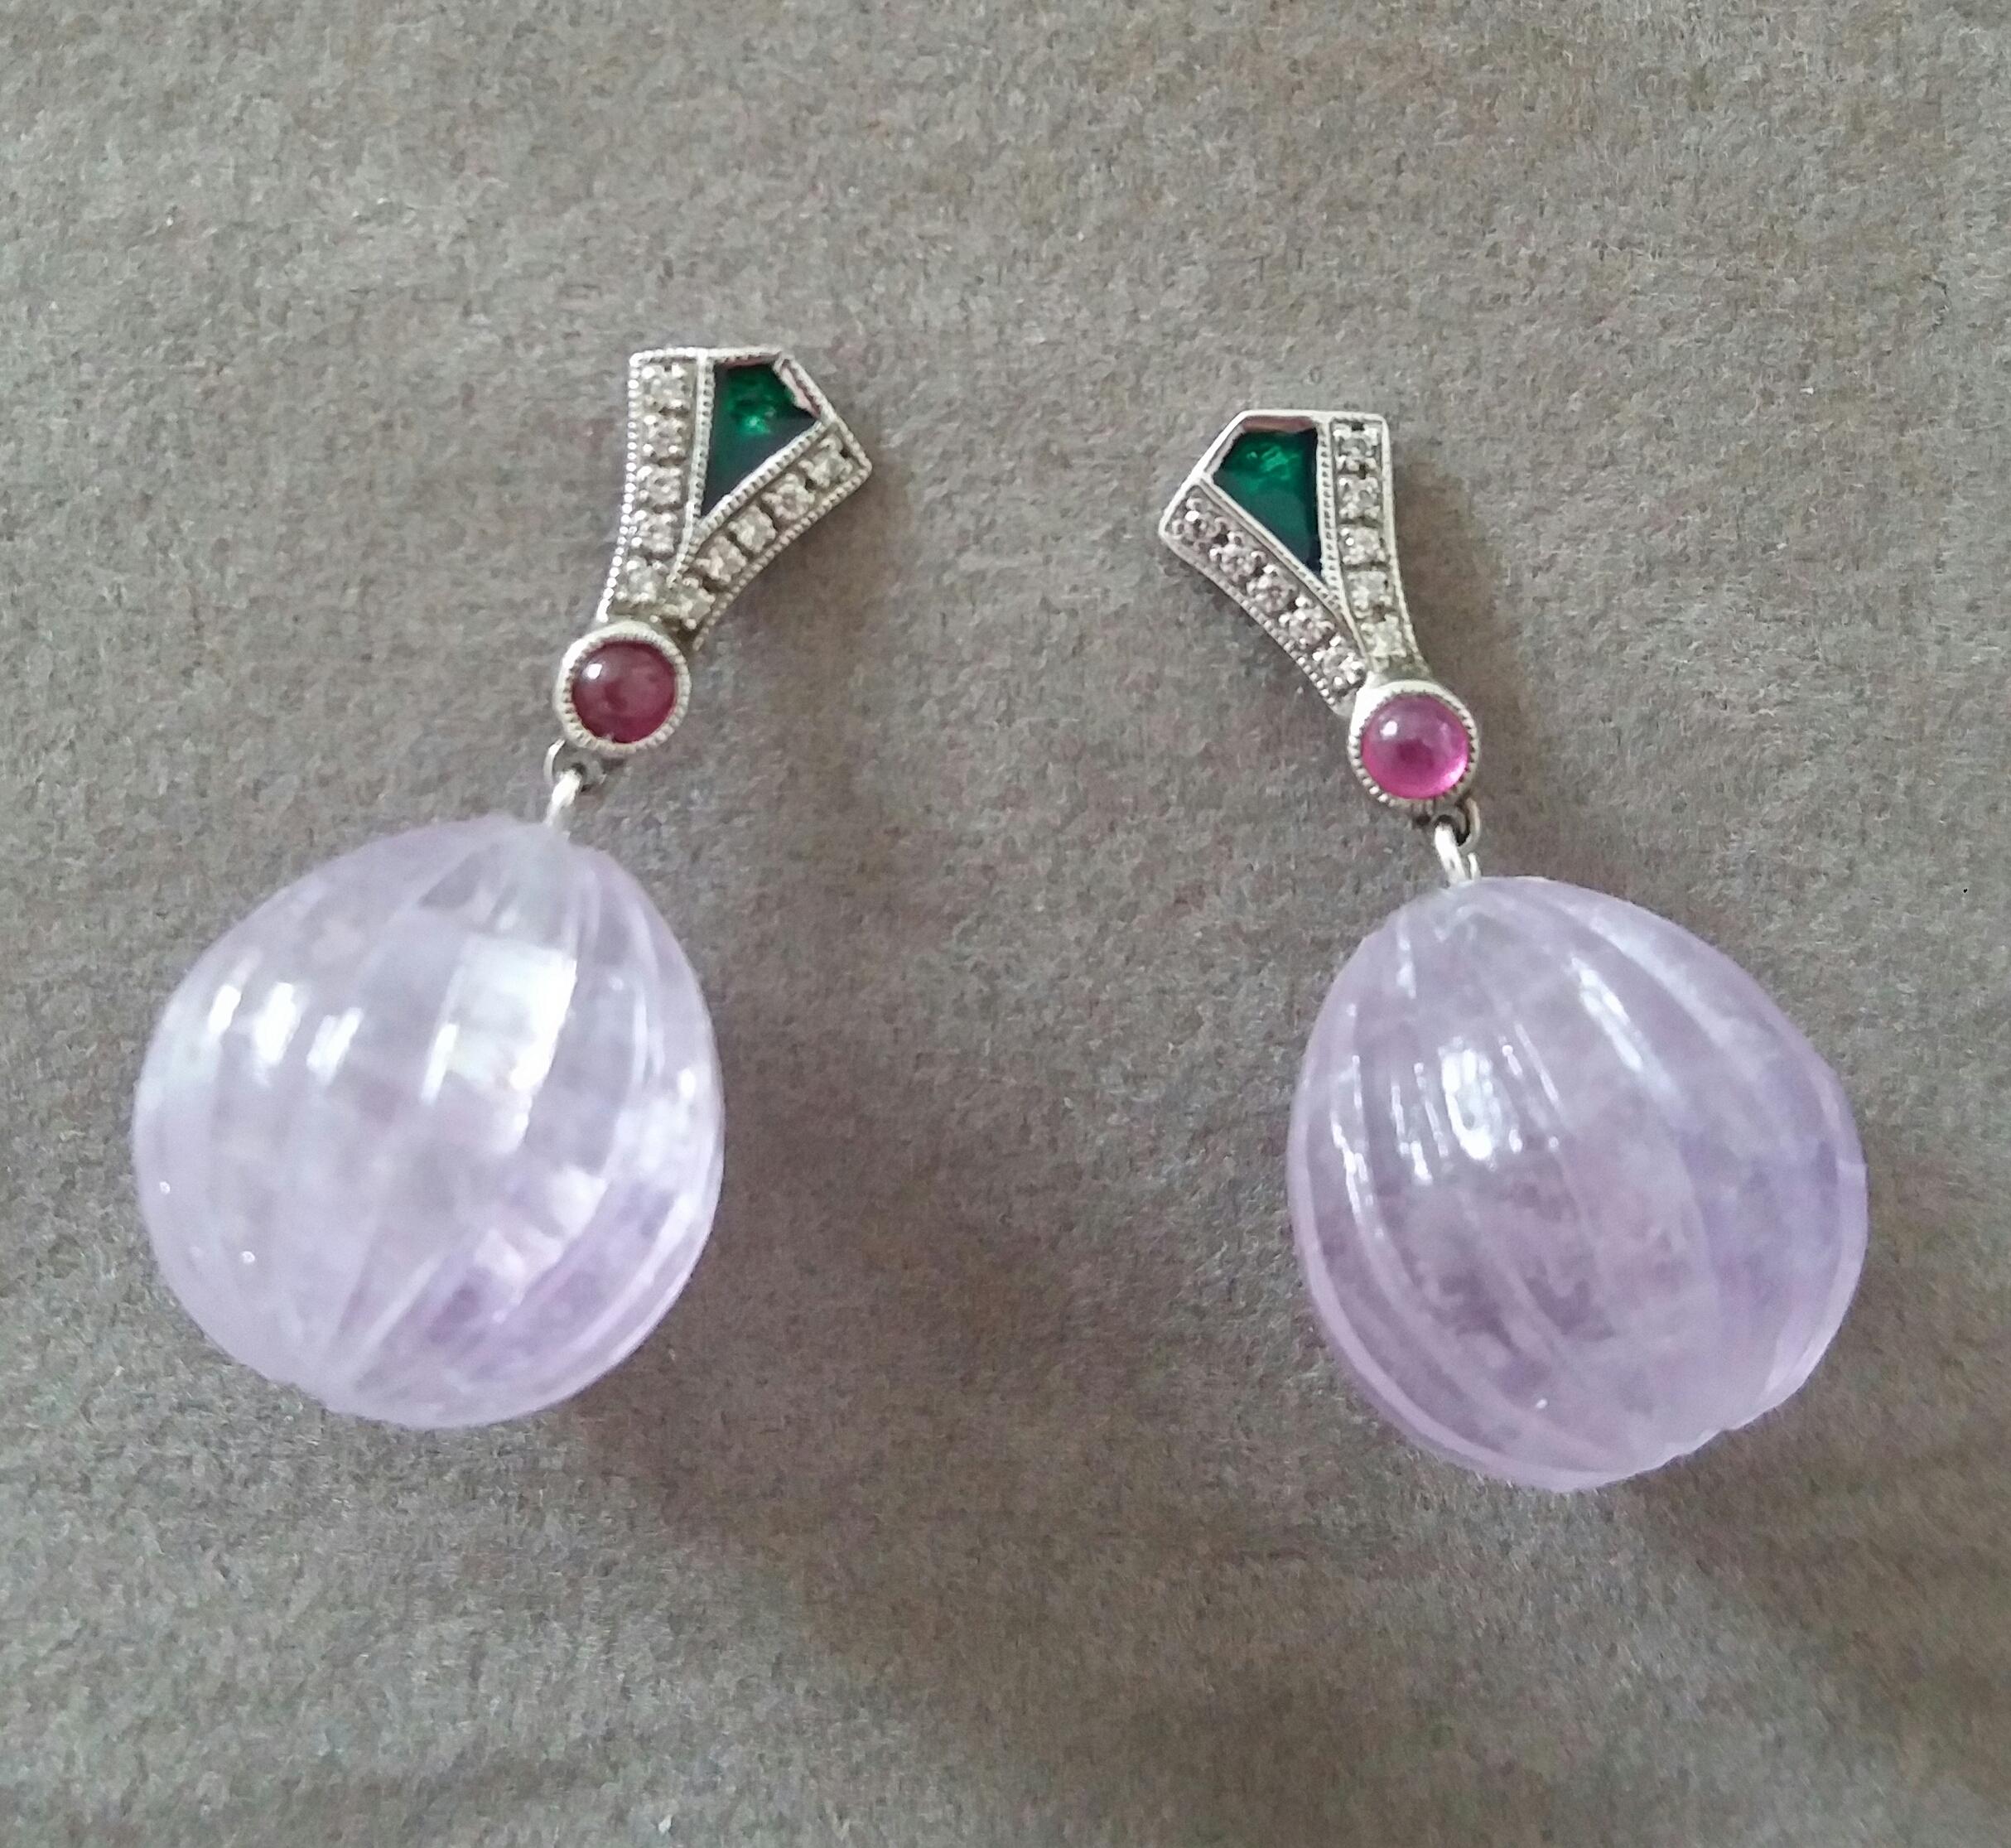 In these classic Art Deco Style earrings the tops are 2 elements  in 14 kt. white gold, 20 round full cut Diamonds,Green Enamel and small round Ruby cabochons ,in the lower parts we have 2 Amethyst Carved Round Drops  measuring 15 x 15 mm and